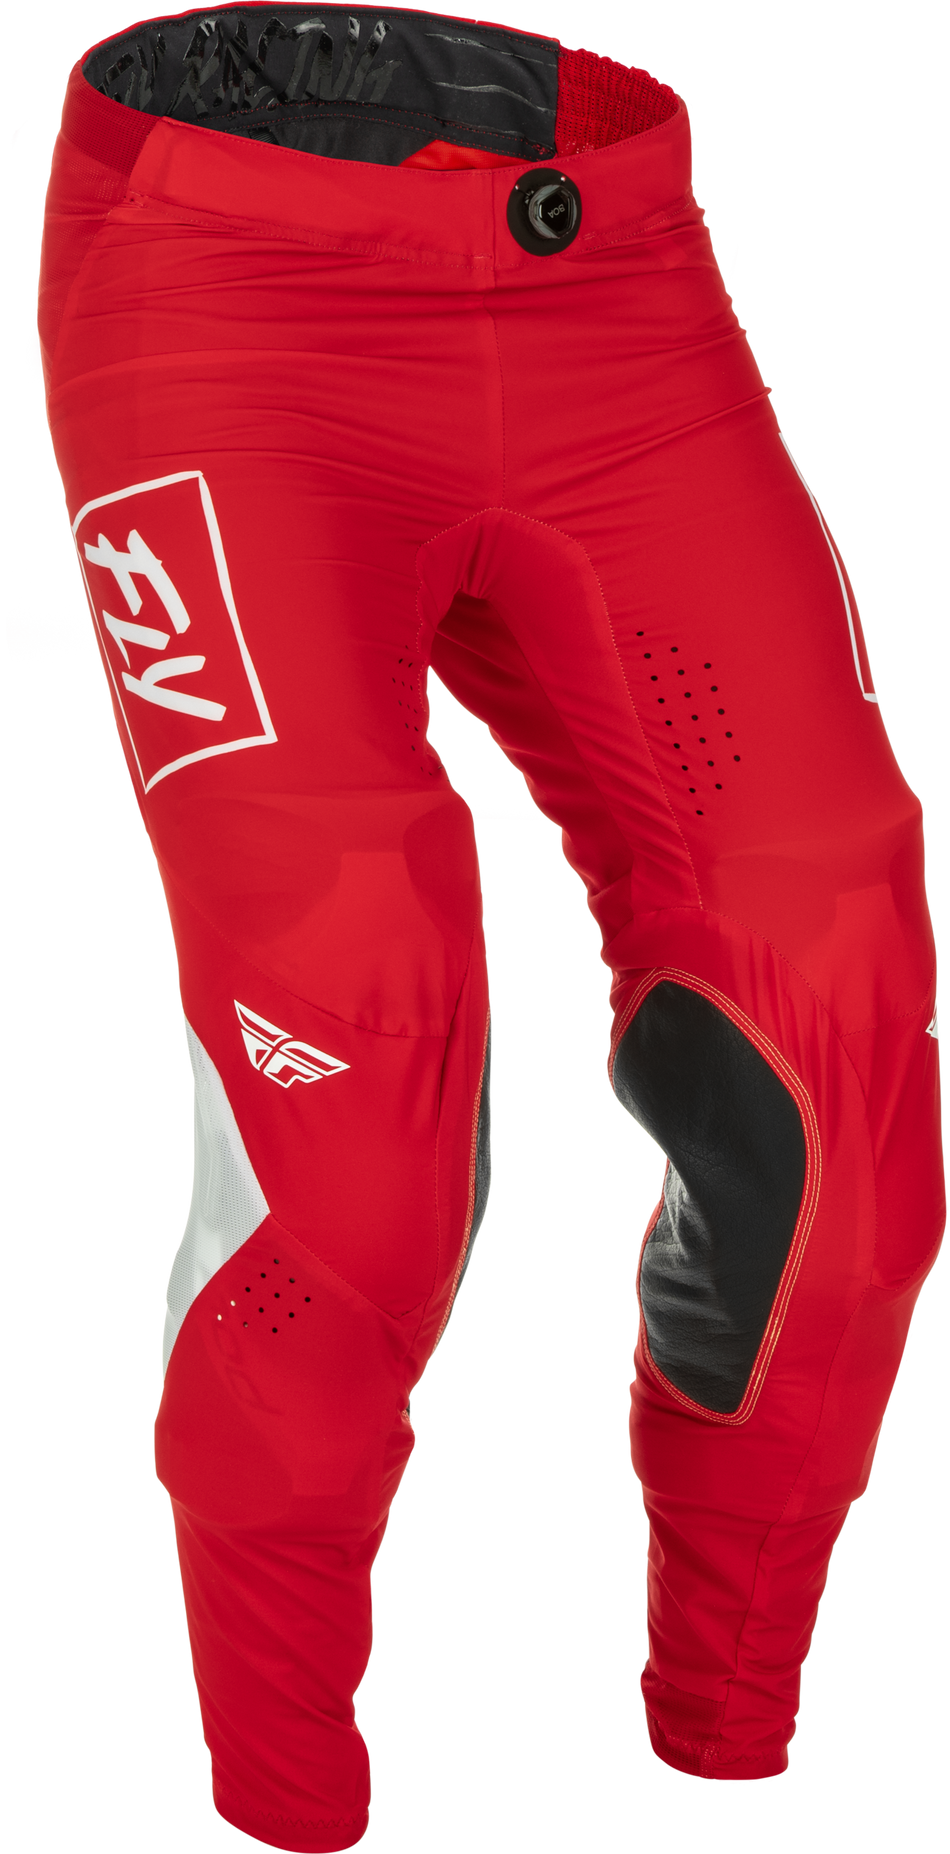 FLY RACING Lite Pants Red/White Size 28 375-73228